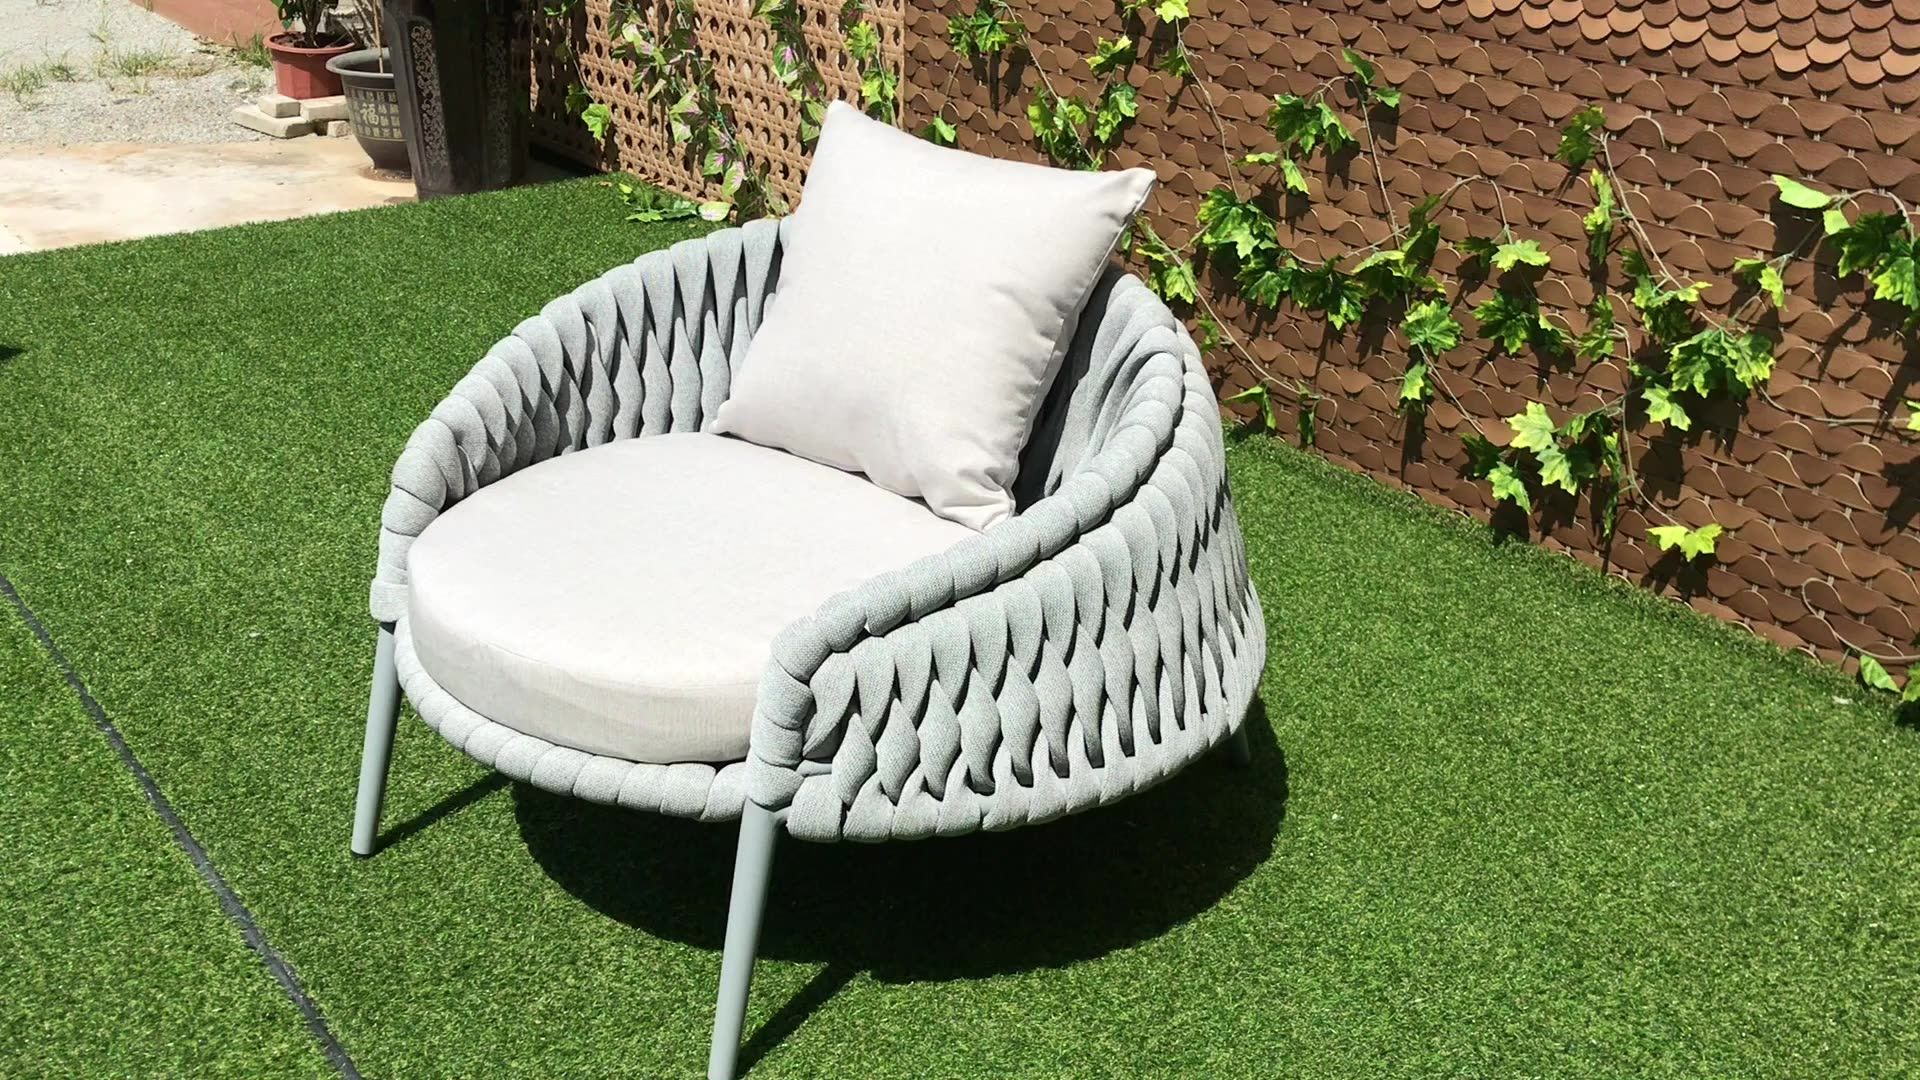 Modern Hotel Aluminum Rope Sofa Rope Furniture Modern Outdoor Furniture Intended For White Fabric Outdoor Patio Sets (View 1 of 15)